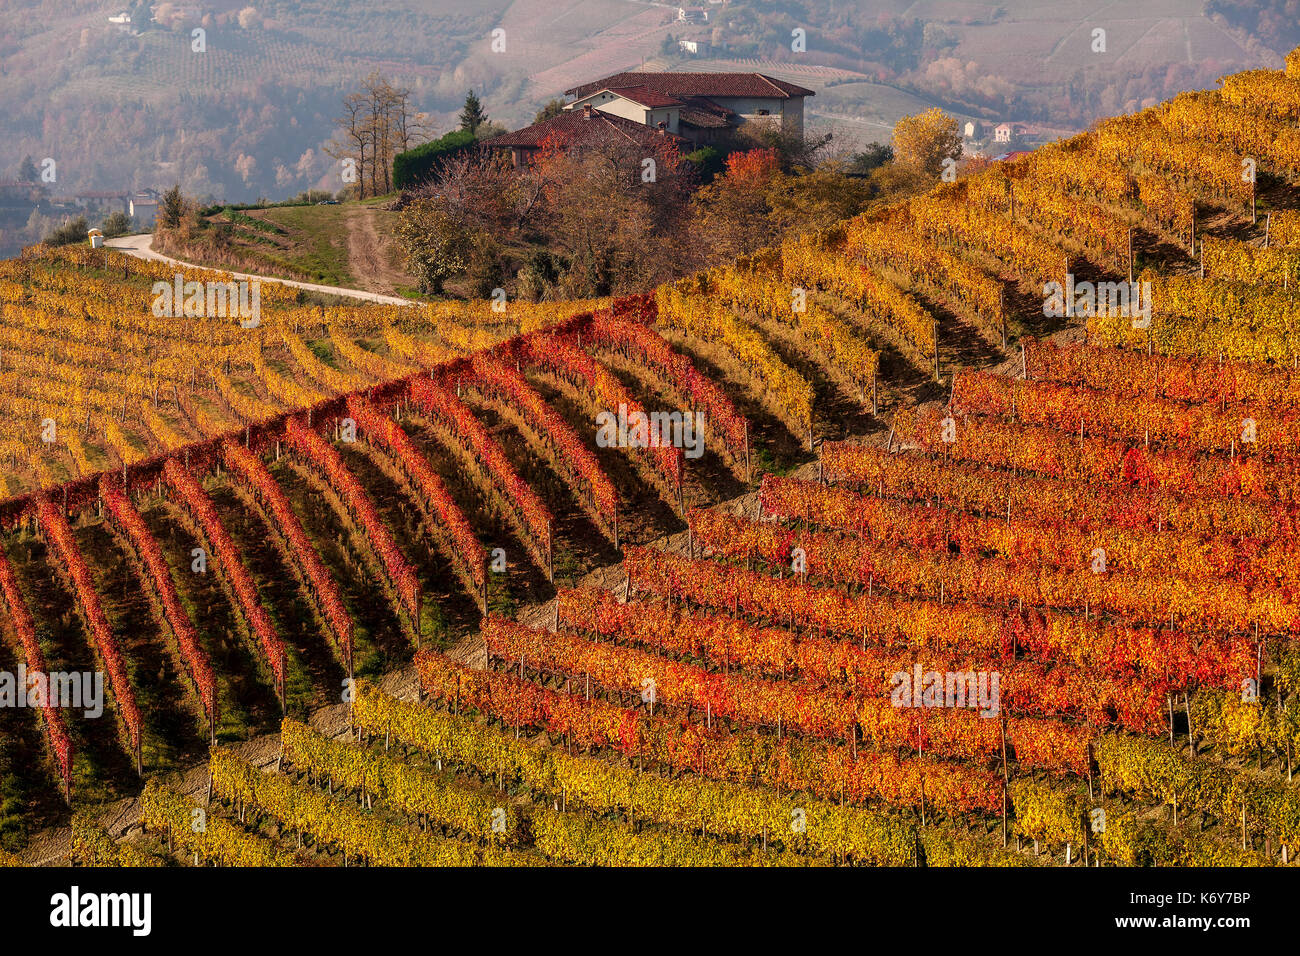 Rows of multicolored autumnal vineyards on the hill in Piedmont, Northern Italy. Stock Photo